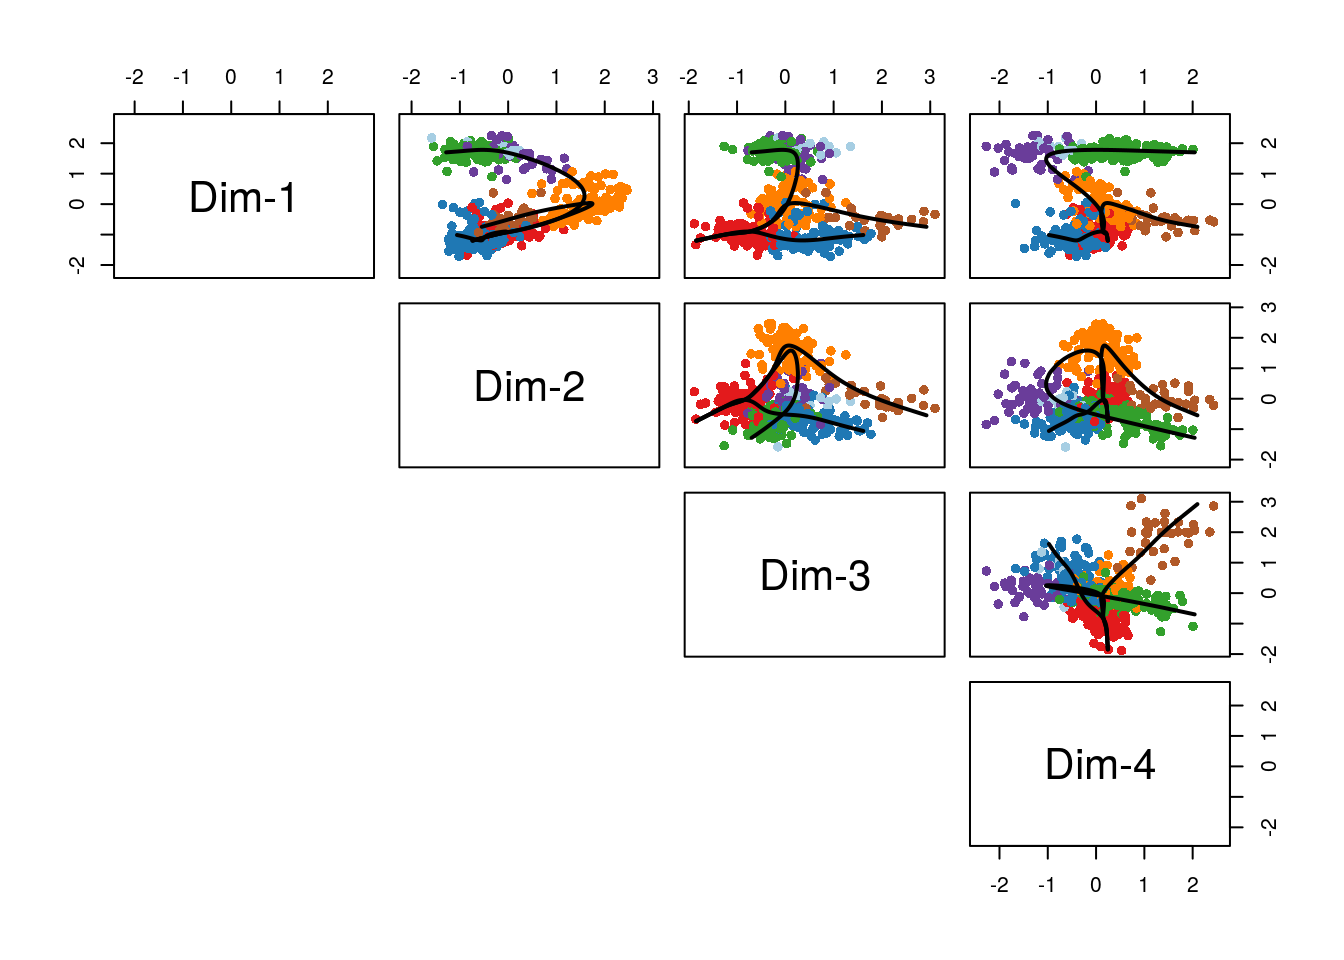 Slingshot: Cells color-coded by cluster in a 4-dimensional MDS space, with smooth curves representing each inferred lineage.